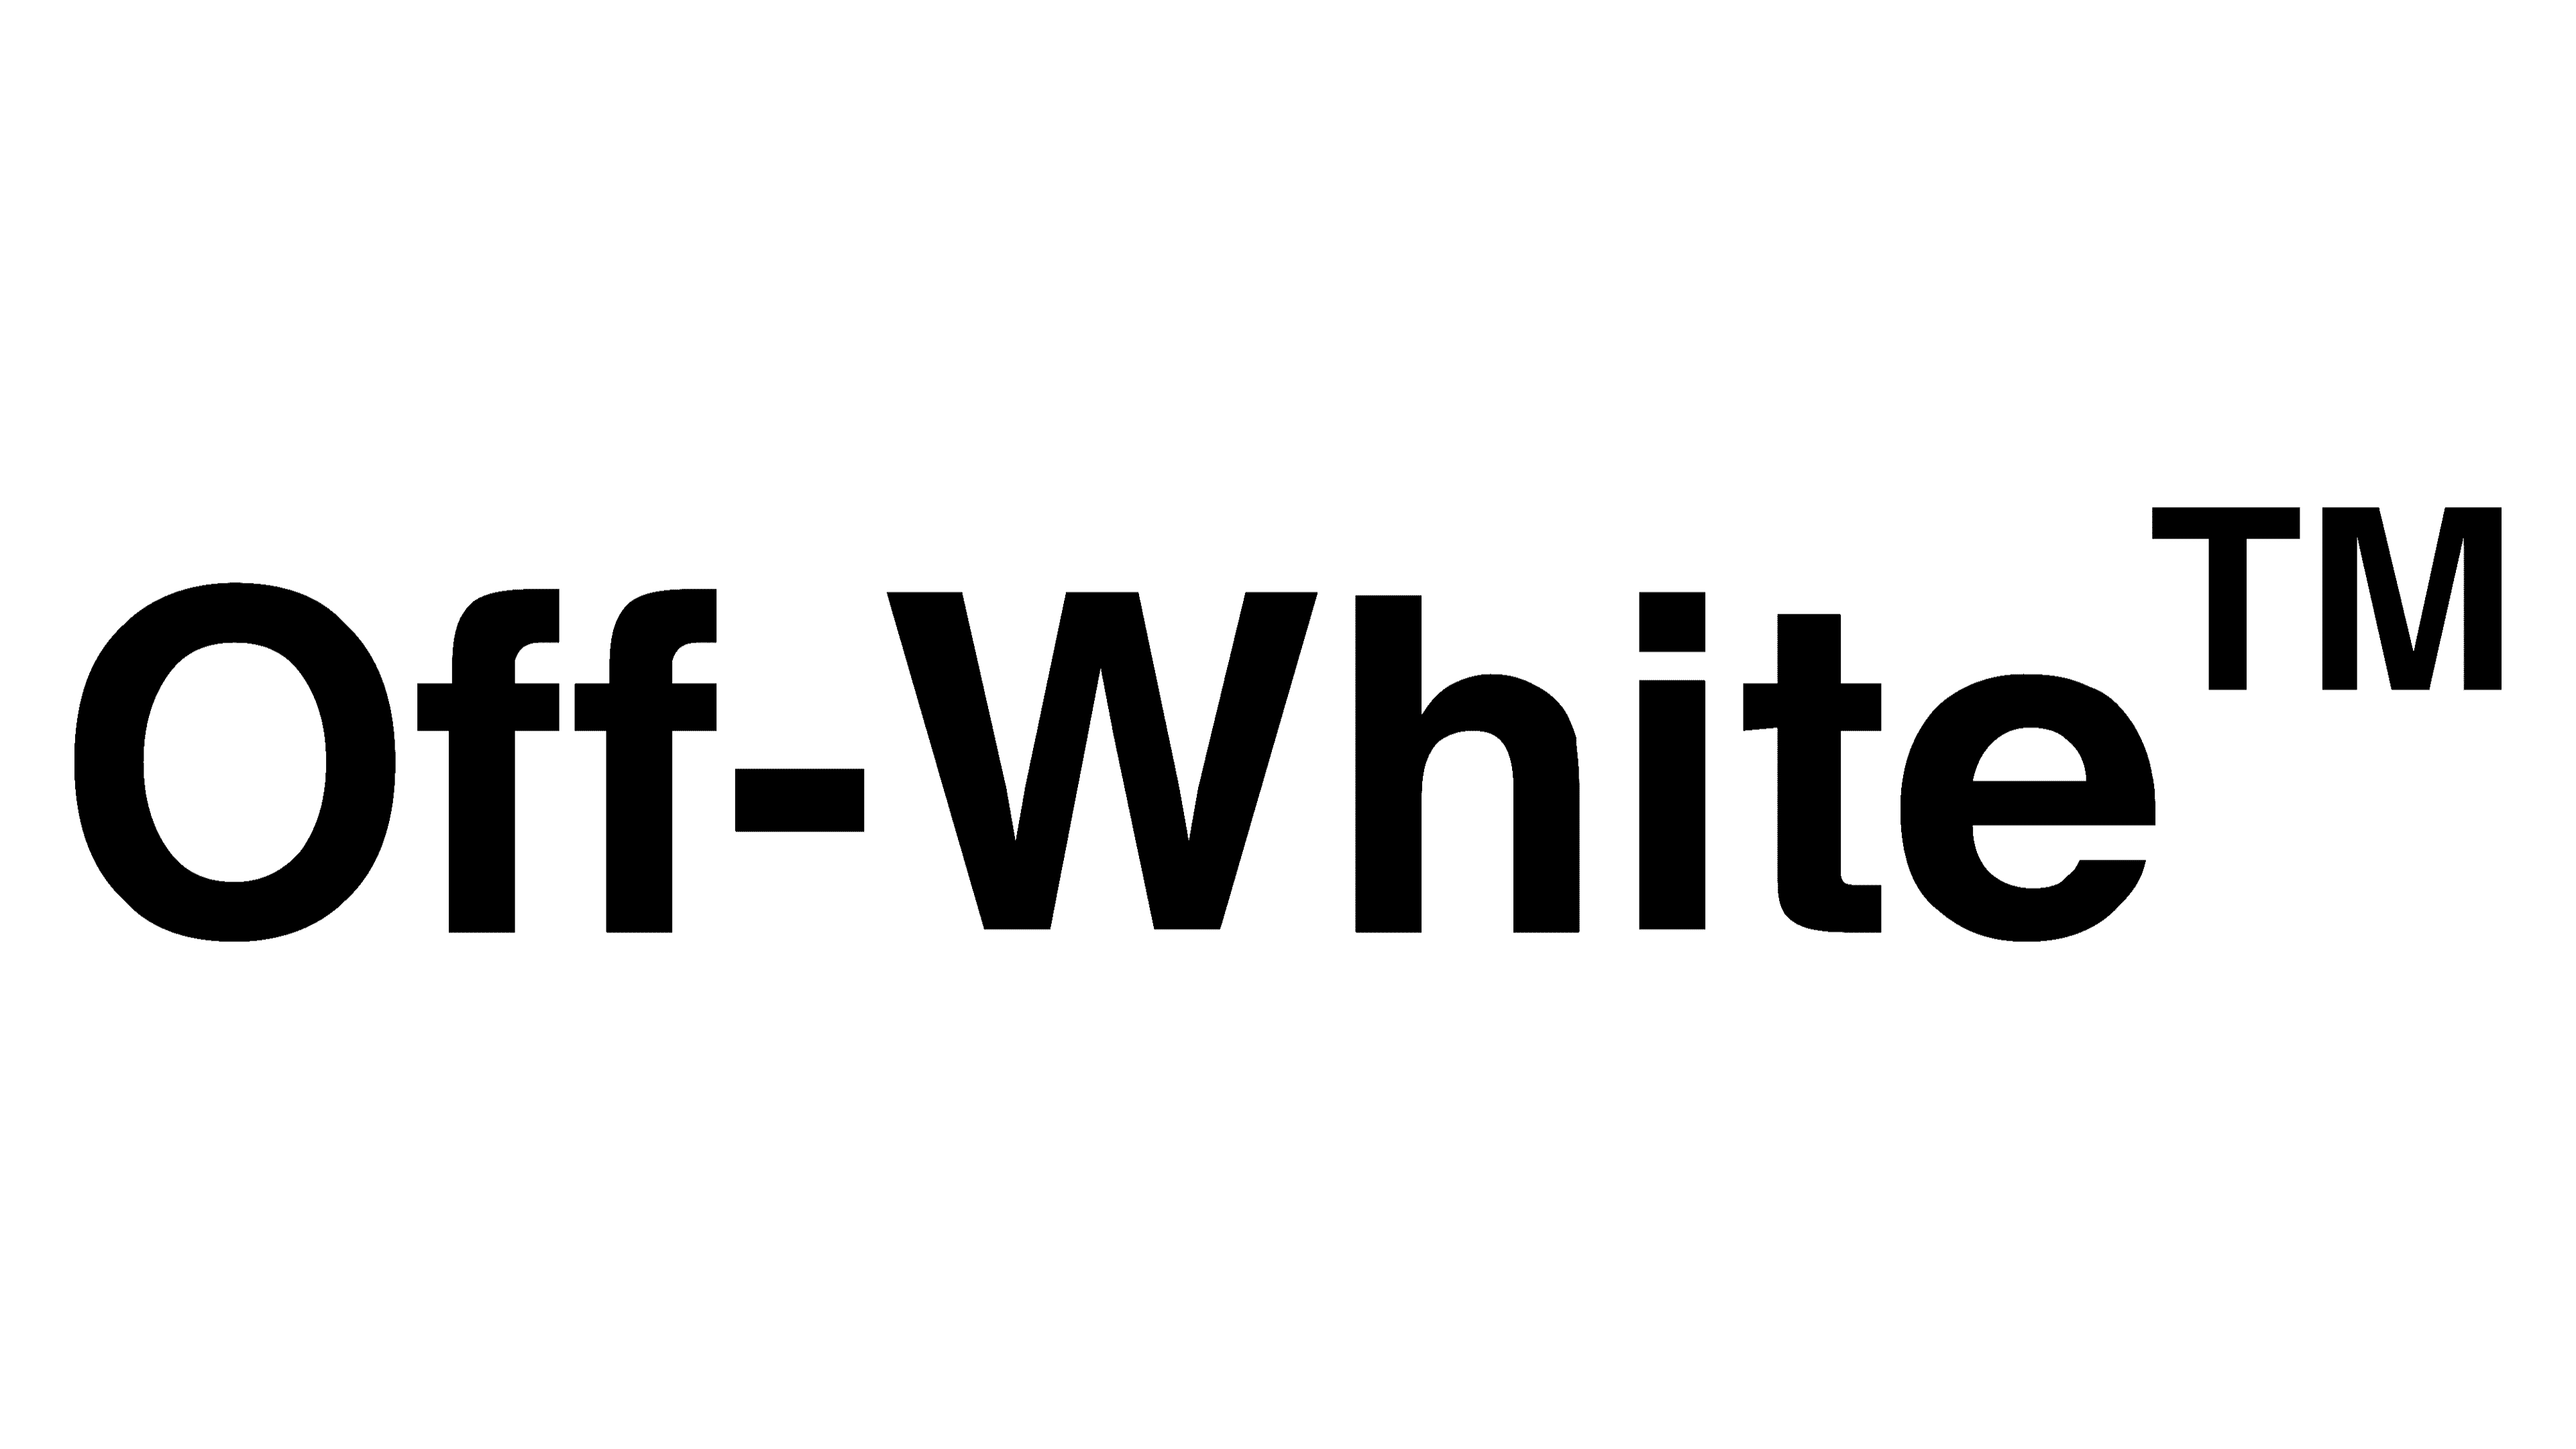 Off White Logo and sign, new logo meaning and history, PNG, SVG